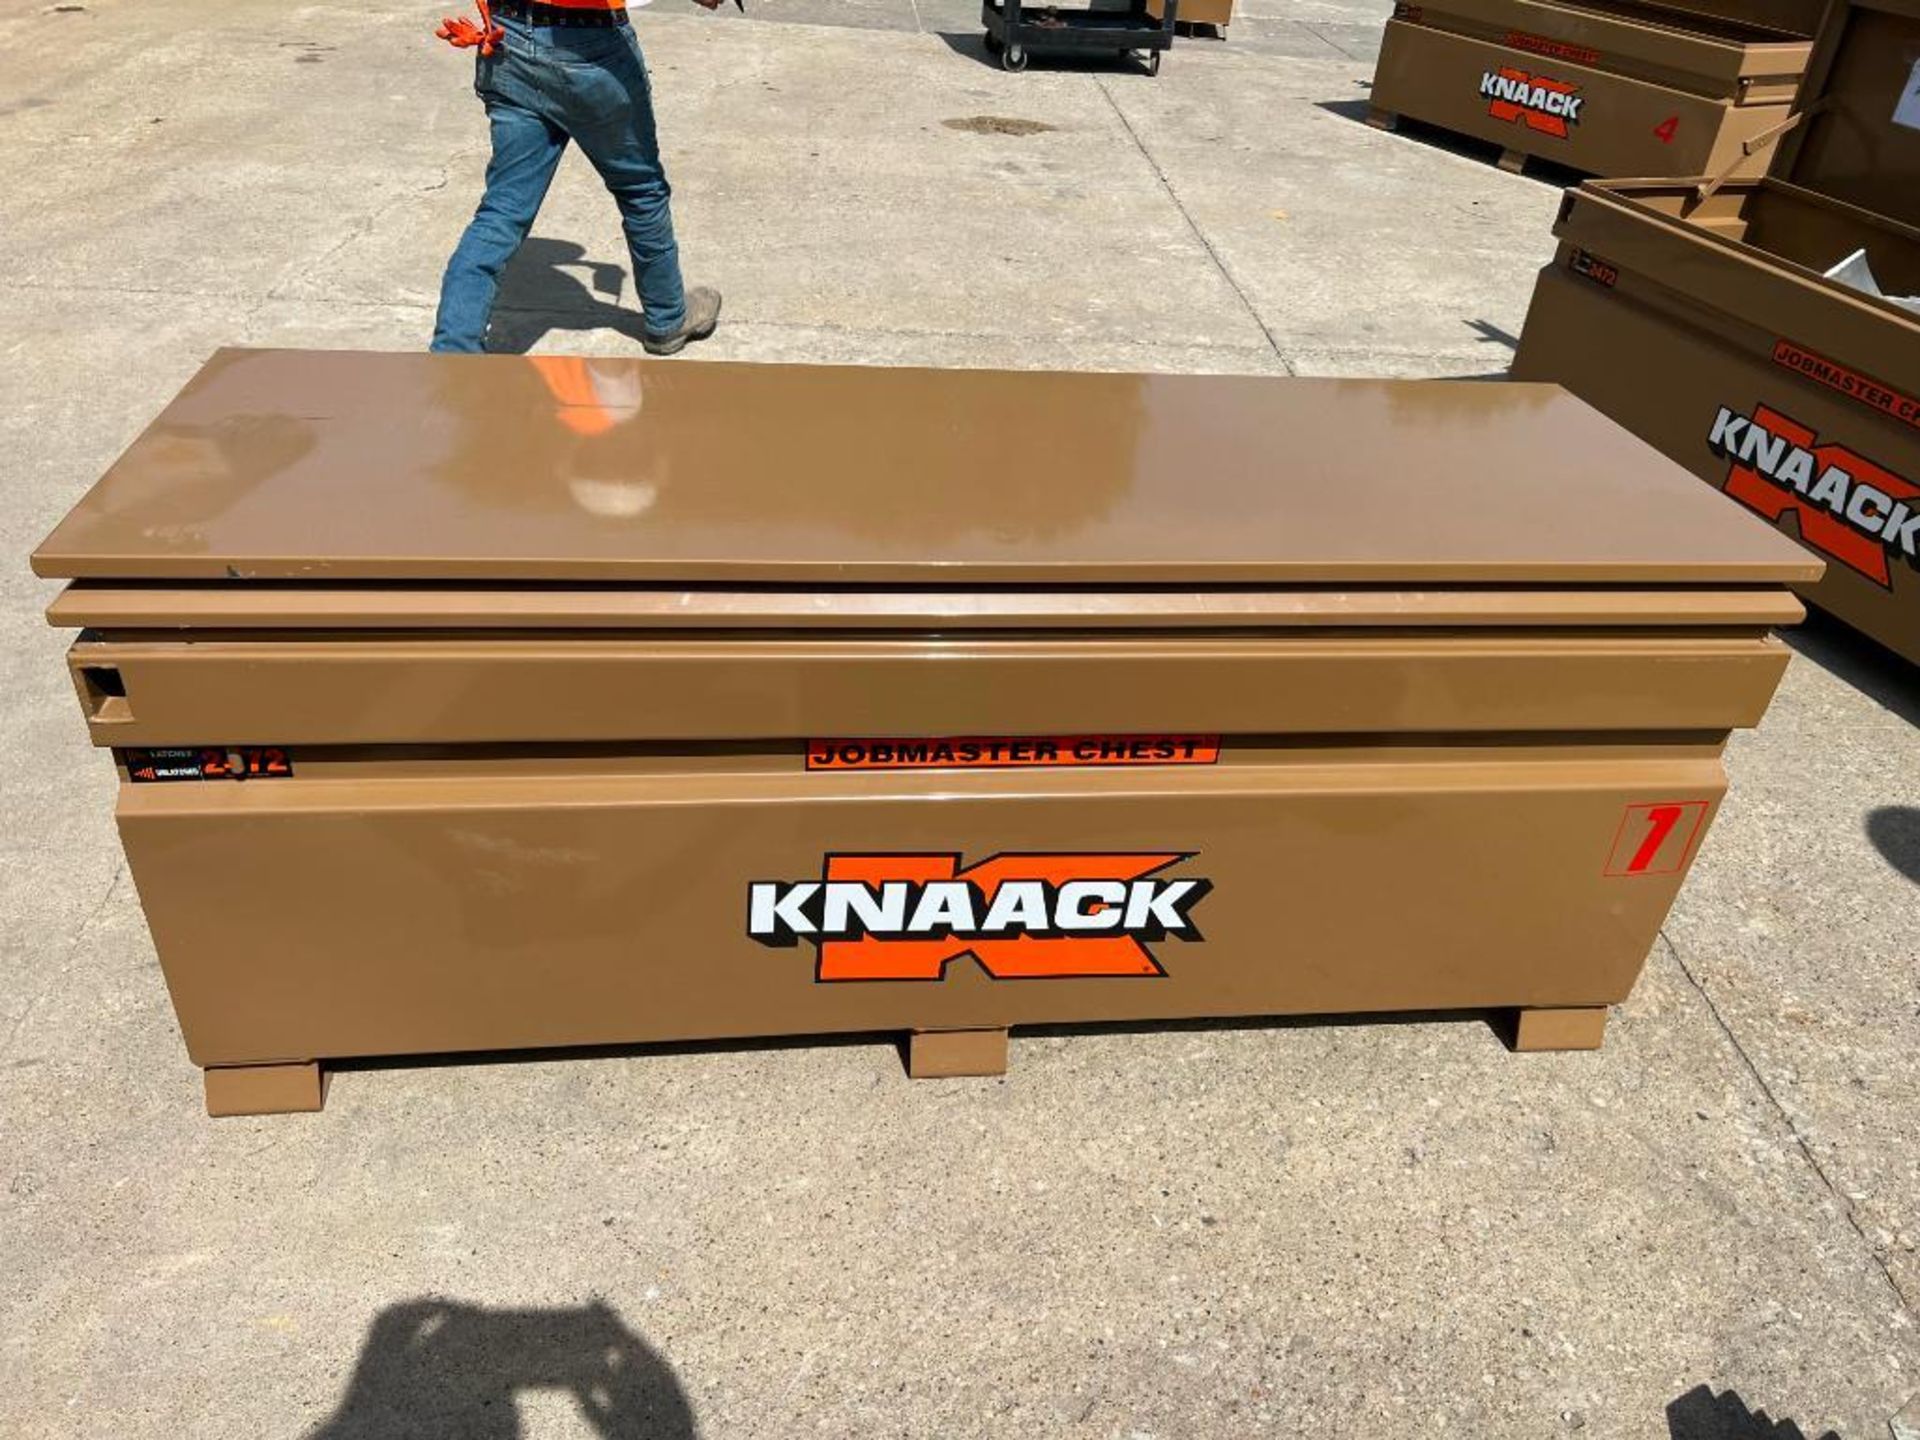 Knaack Jobmaster Chest, Model #2472, Serial #2211017527. Located in Mt. Pleasant, IA